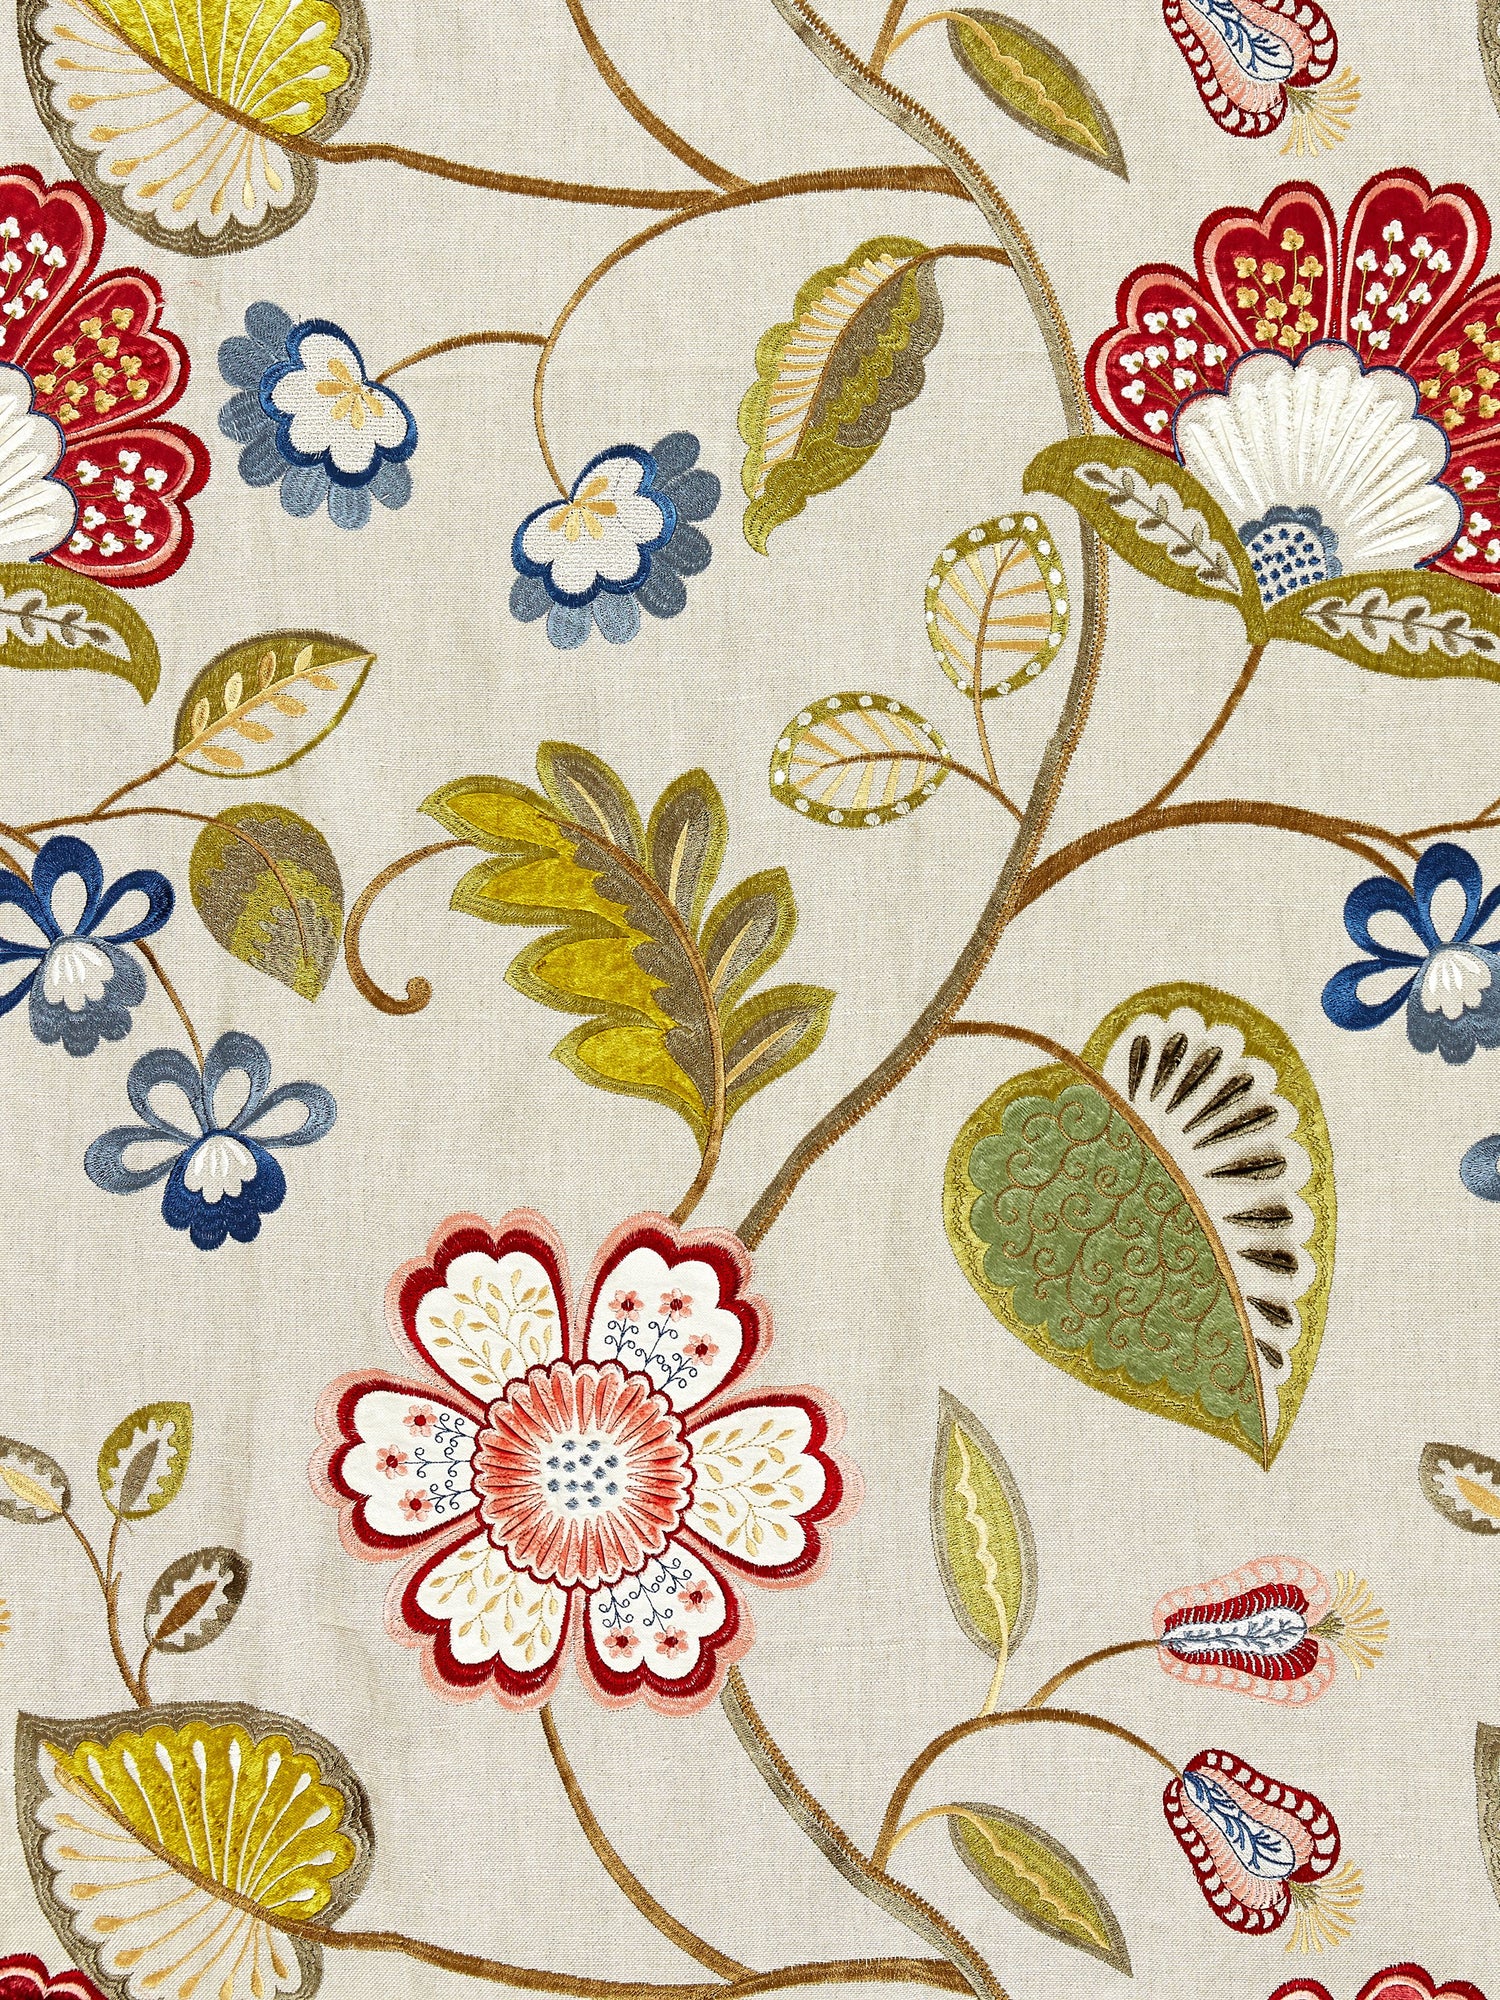 Willowood Embroidery fabric in bloom color - pattern number SC 000227071 - by Scalamandre in the Scalamandre Fabrics Book 1 collection